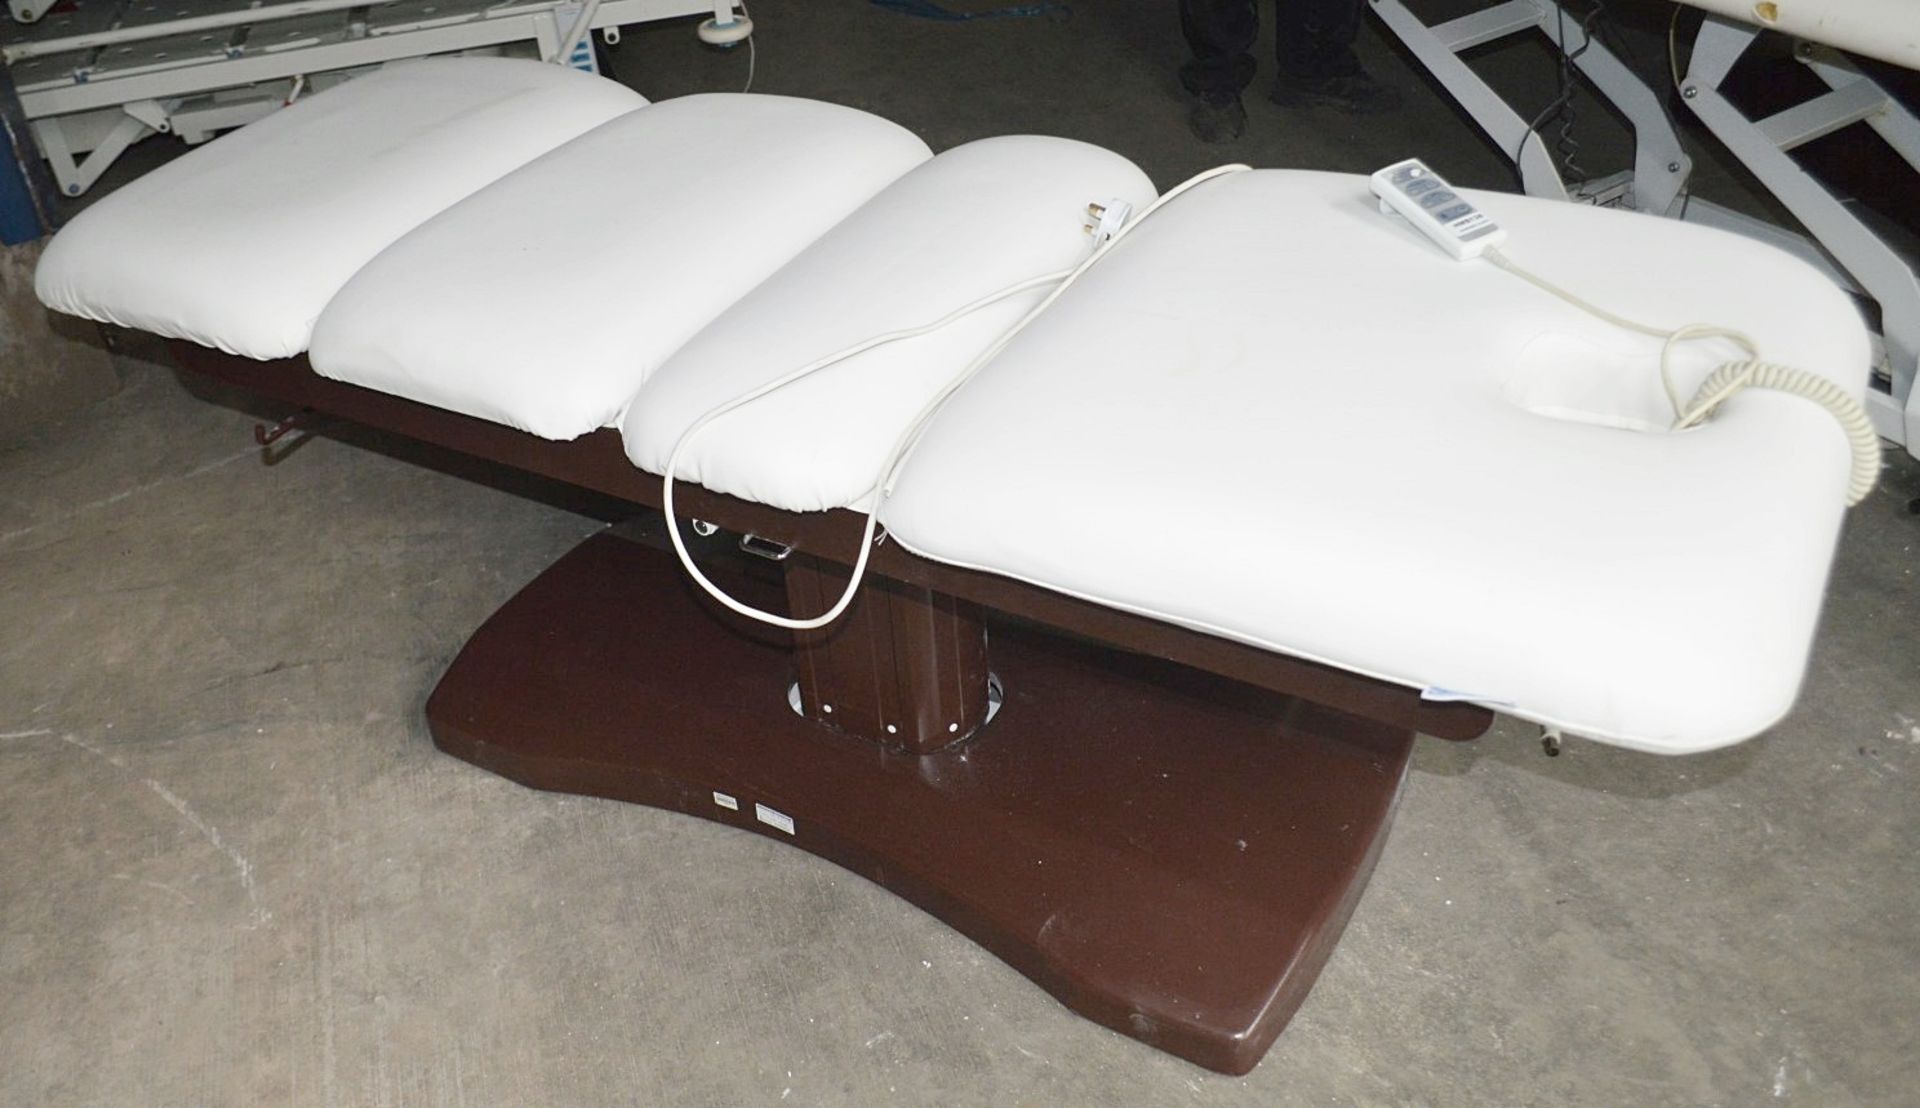 1 x COSMETRONIC Professional 4-Function Electric-Hydraulic Massage Table Spa Bed (Requires Remote) - Image 2 of 7